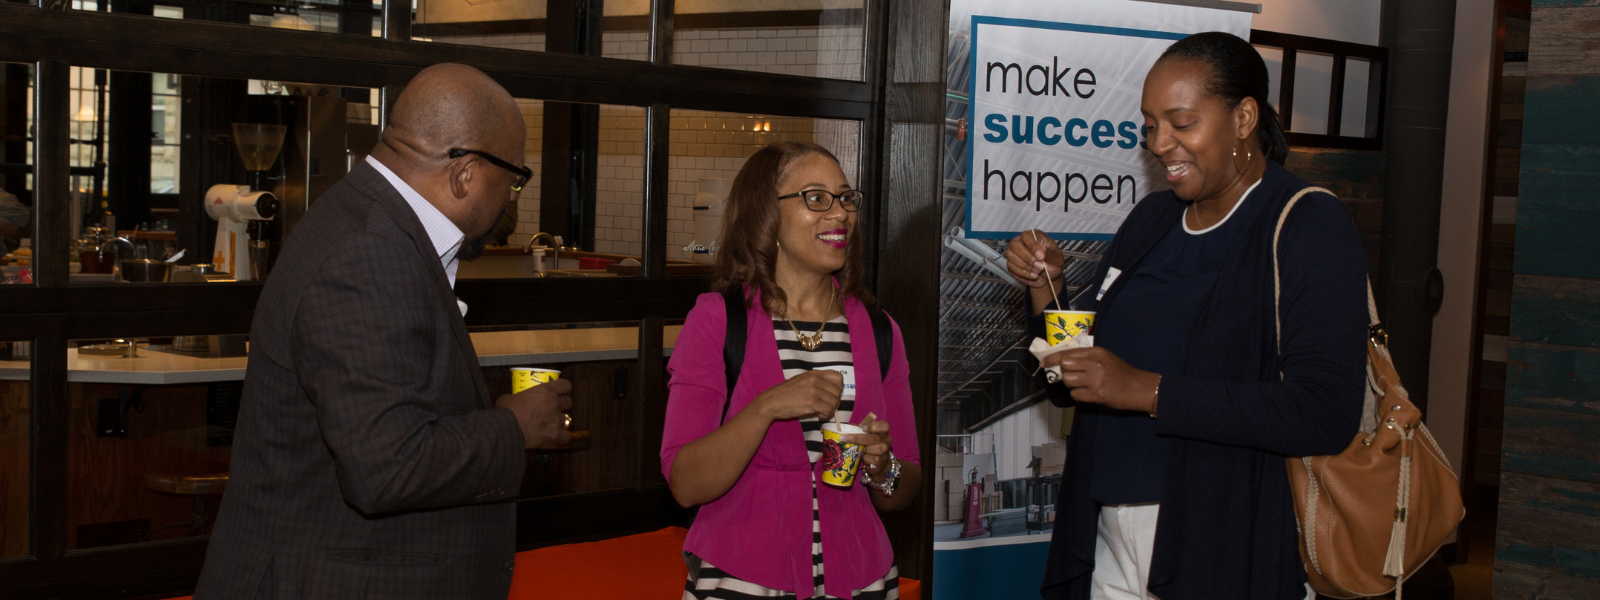 Diversity Leadership Society members networking at event